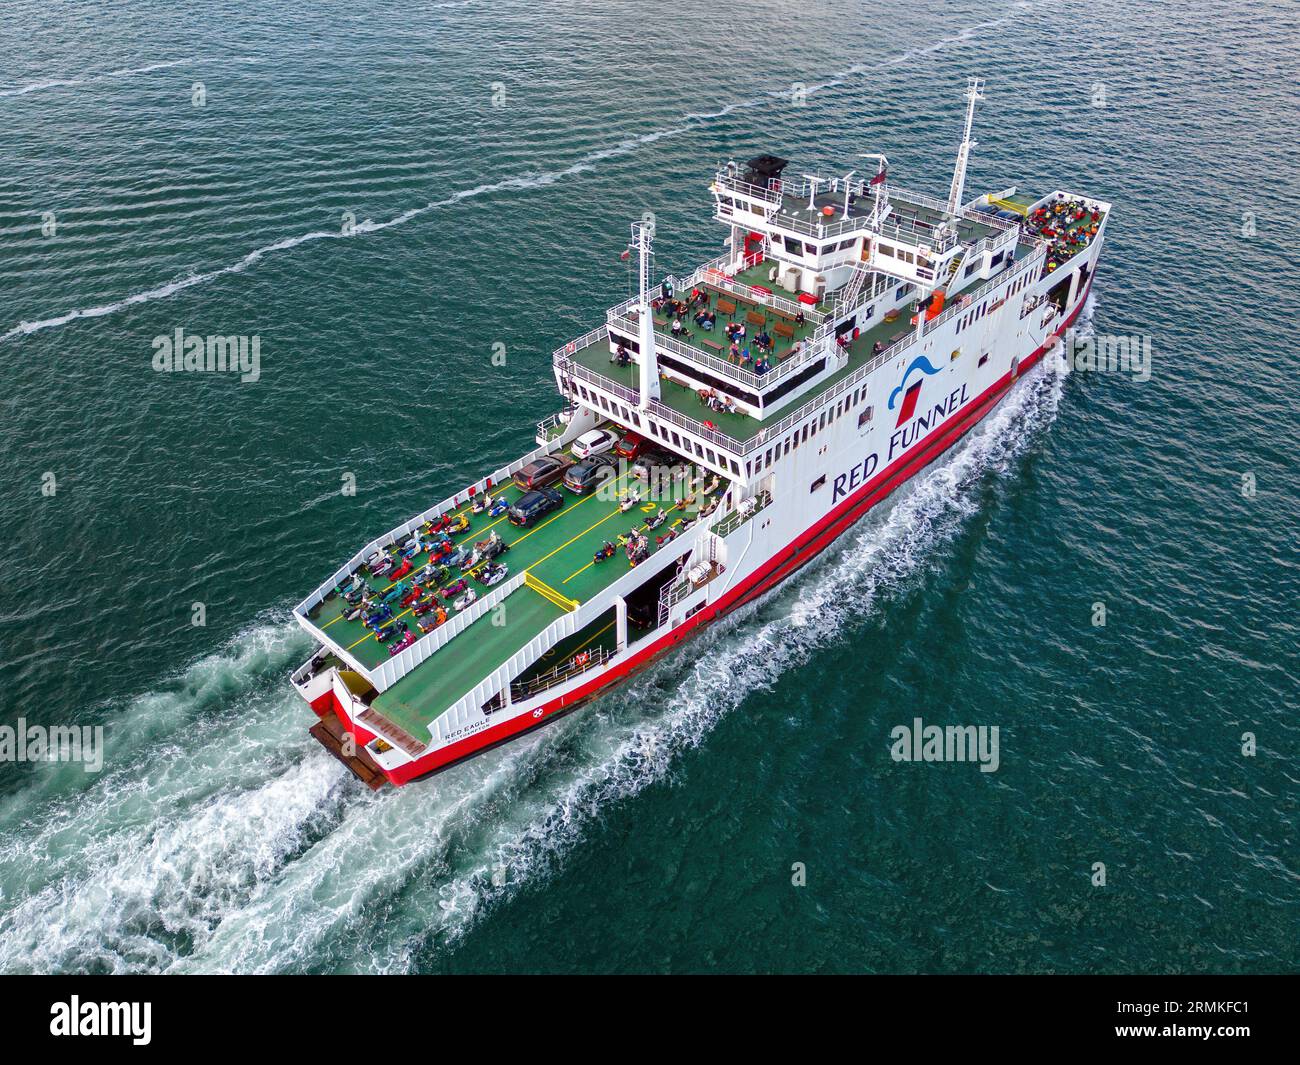 Aerial view of Red Funnel Ferries' Red Eagle underway on a crossing between Cowes on the Isle of Wight and Southampton. Stock Photo